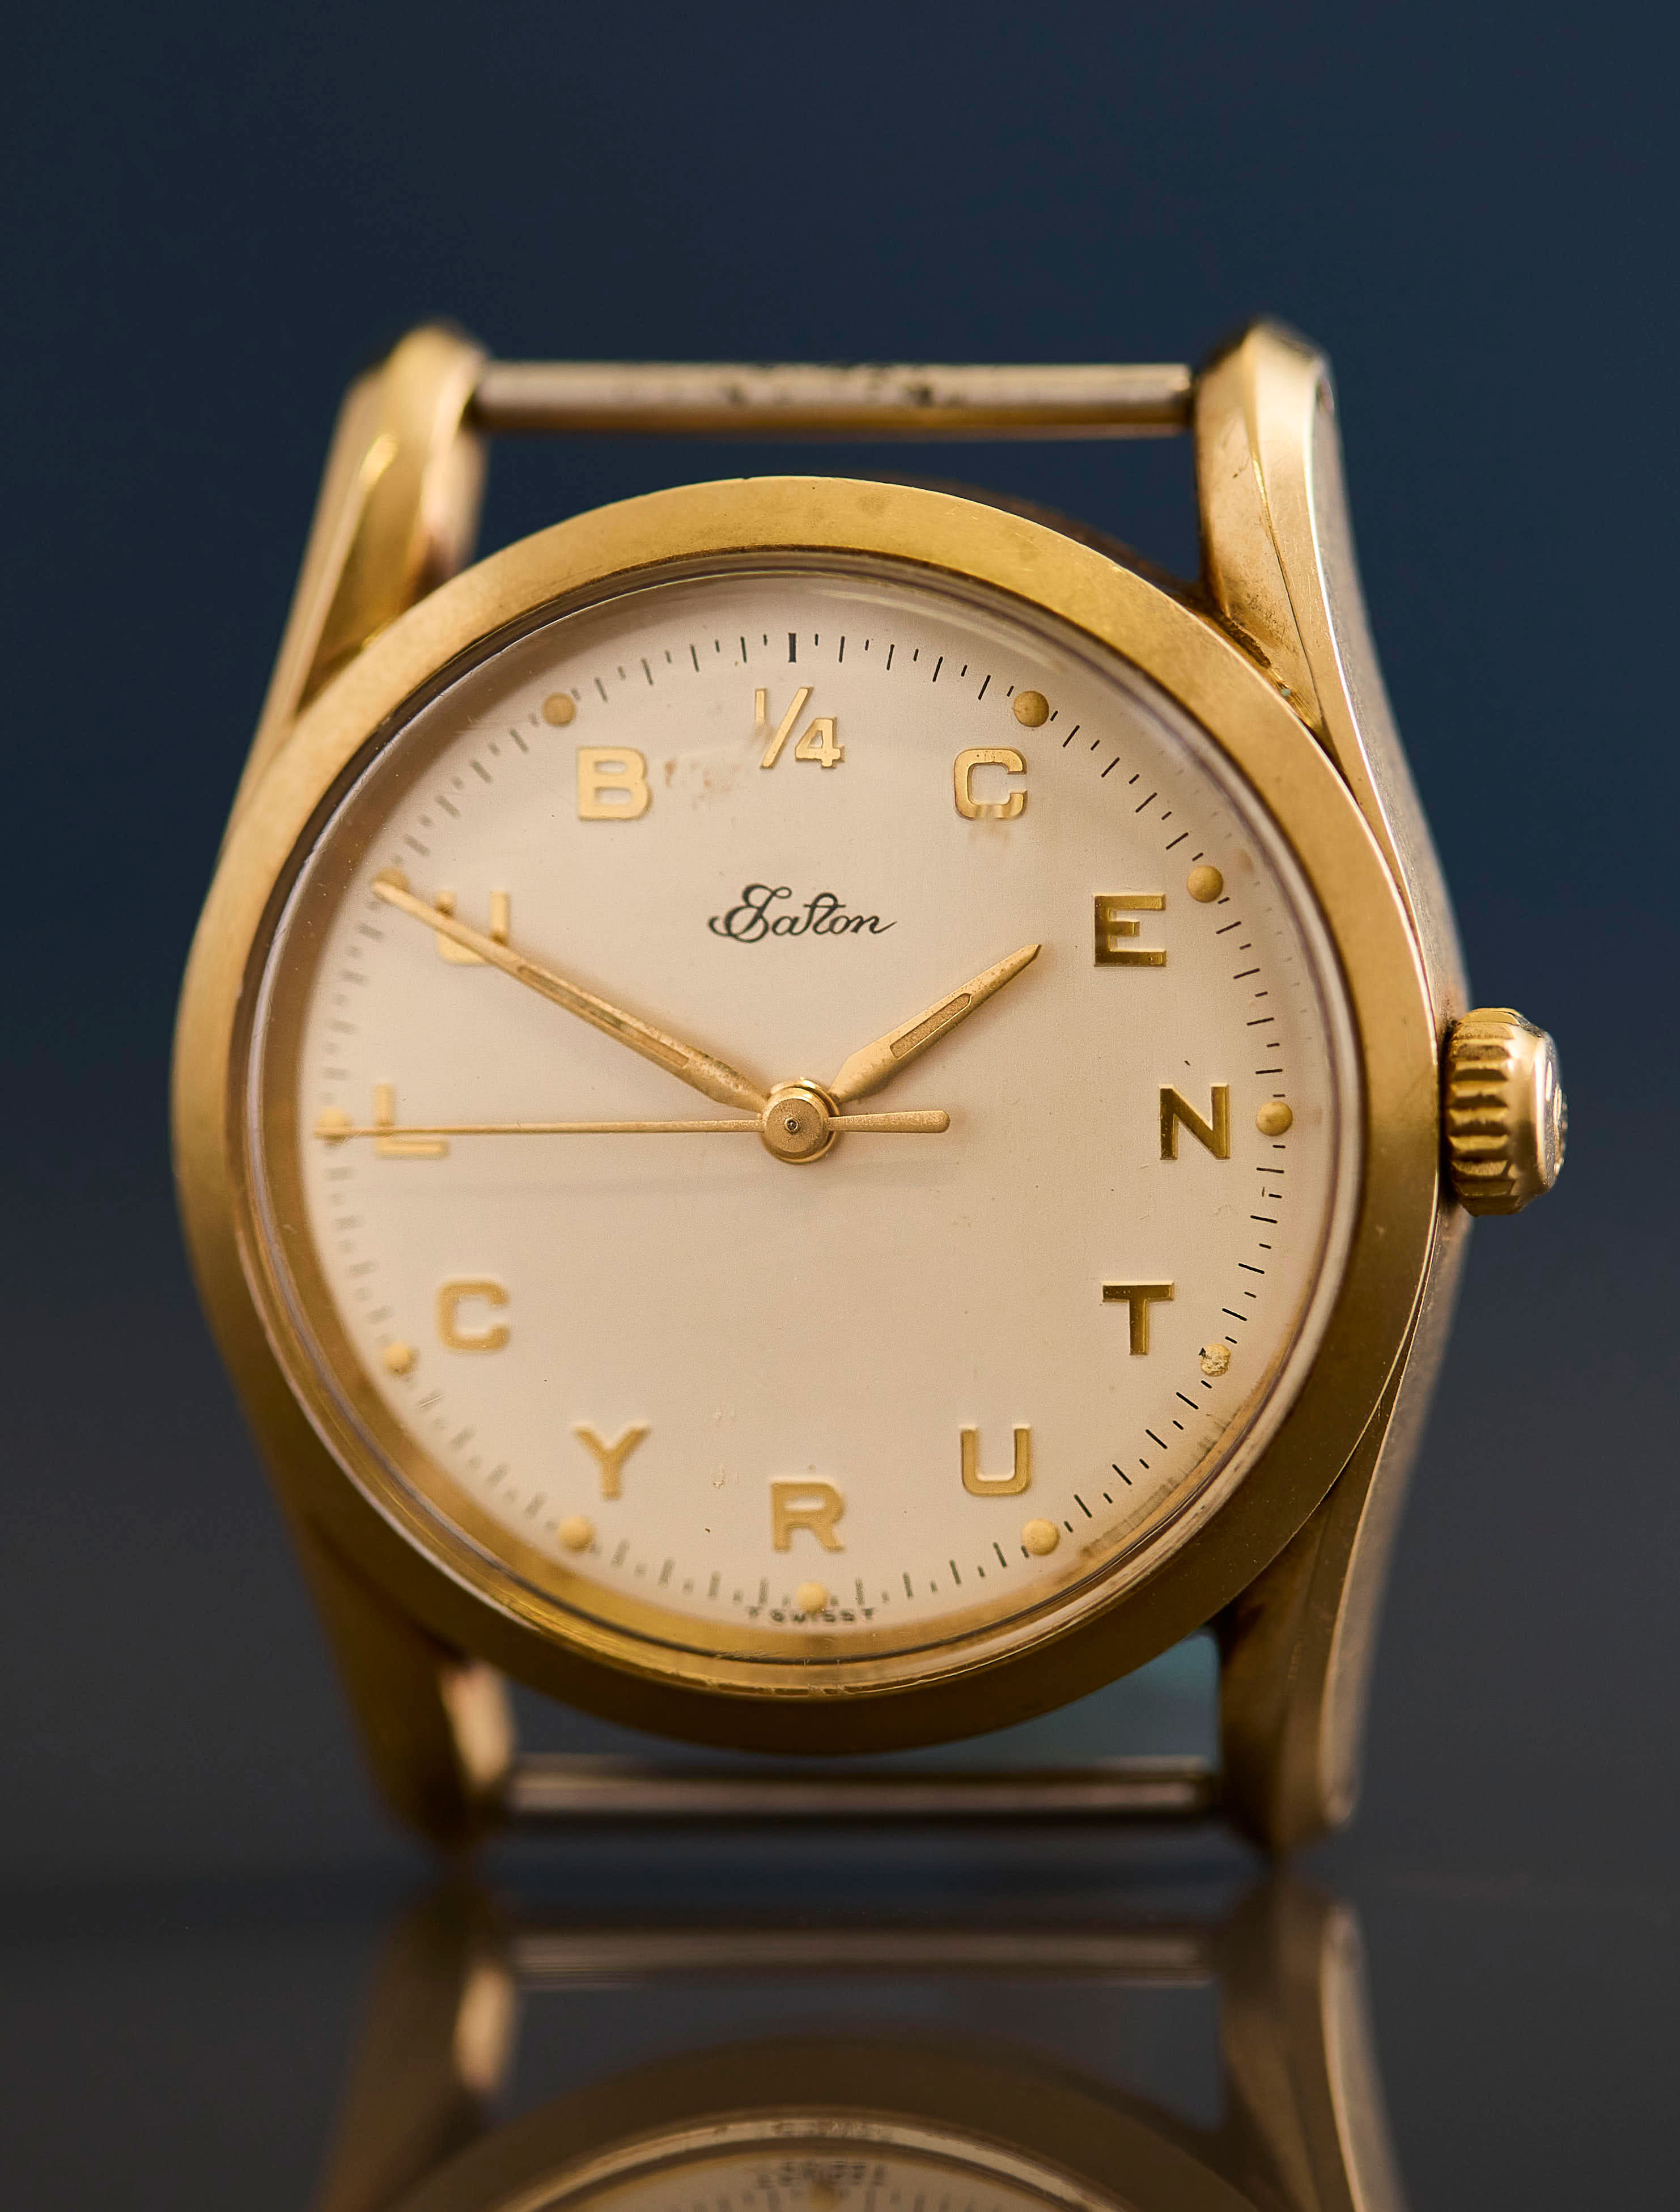 The Canadian Rolex: Eaton’s ¼ Century Club Watch